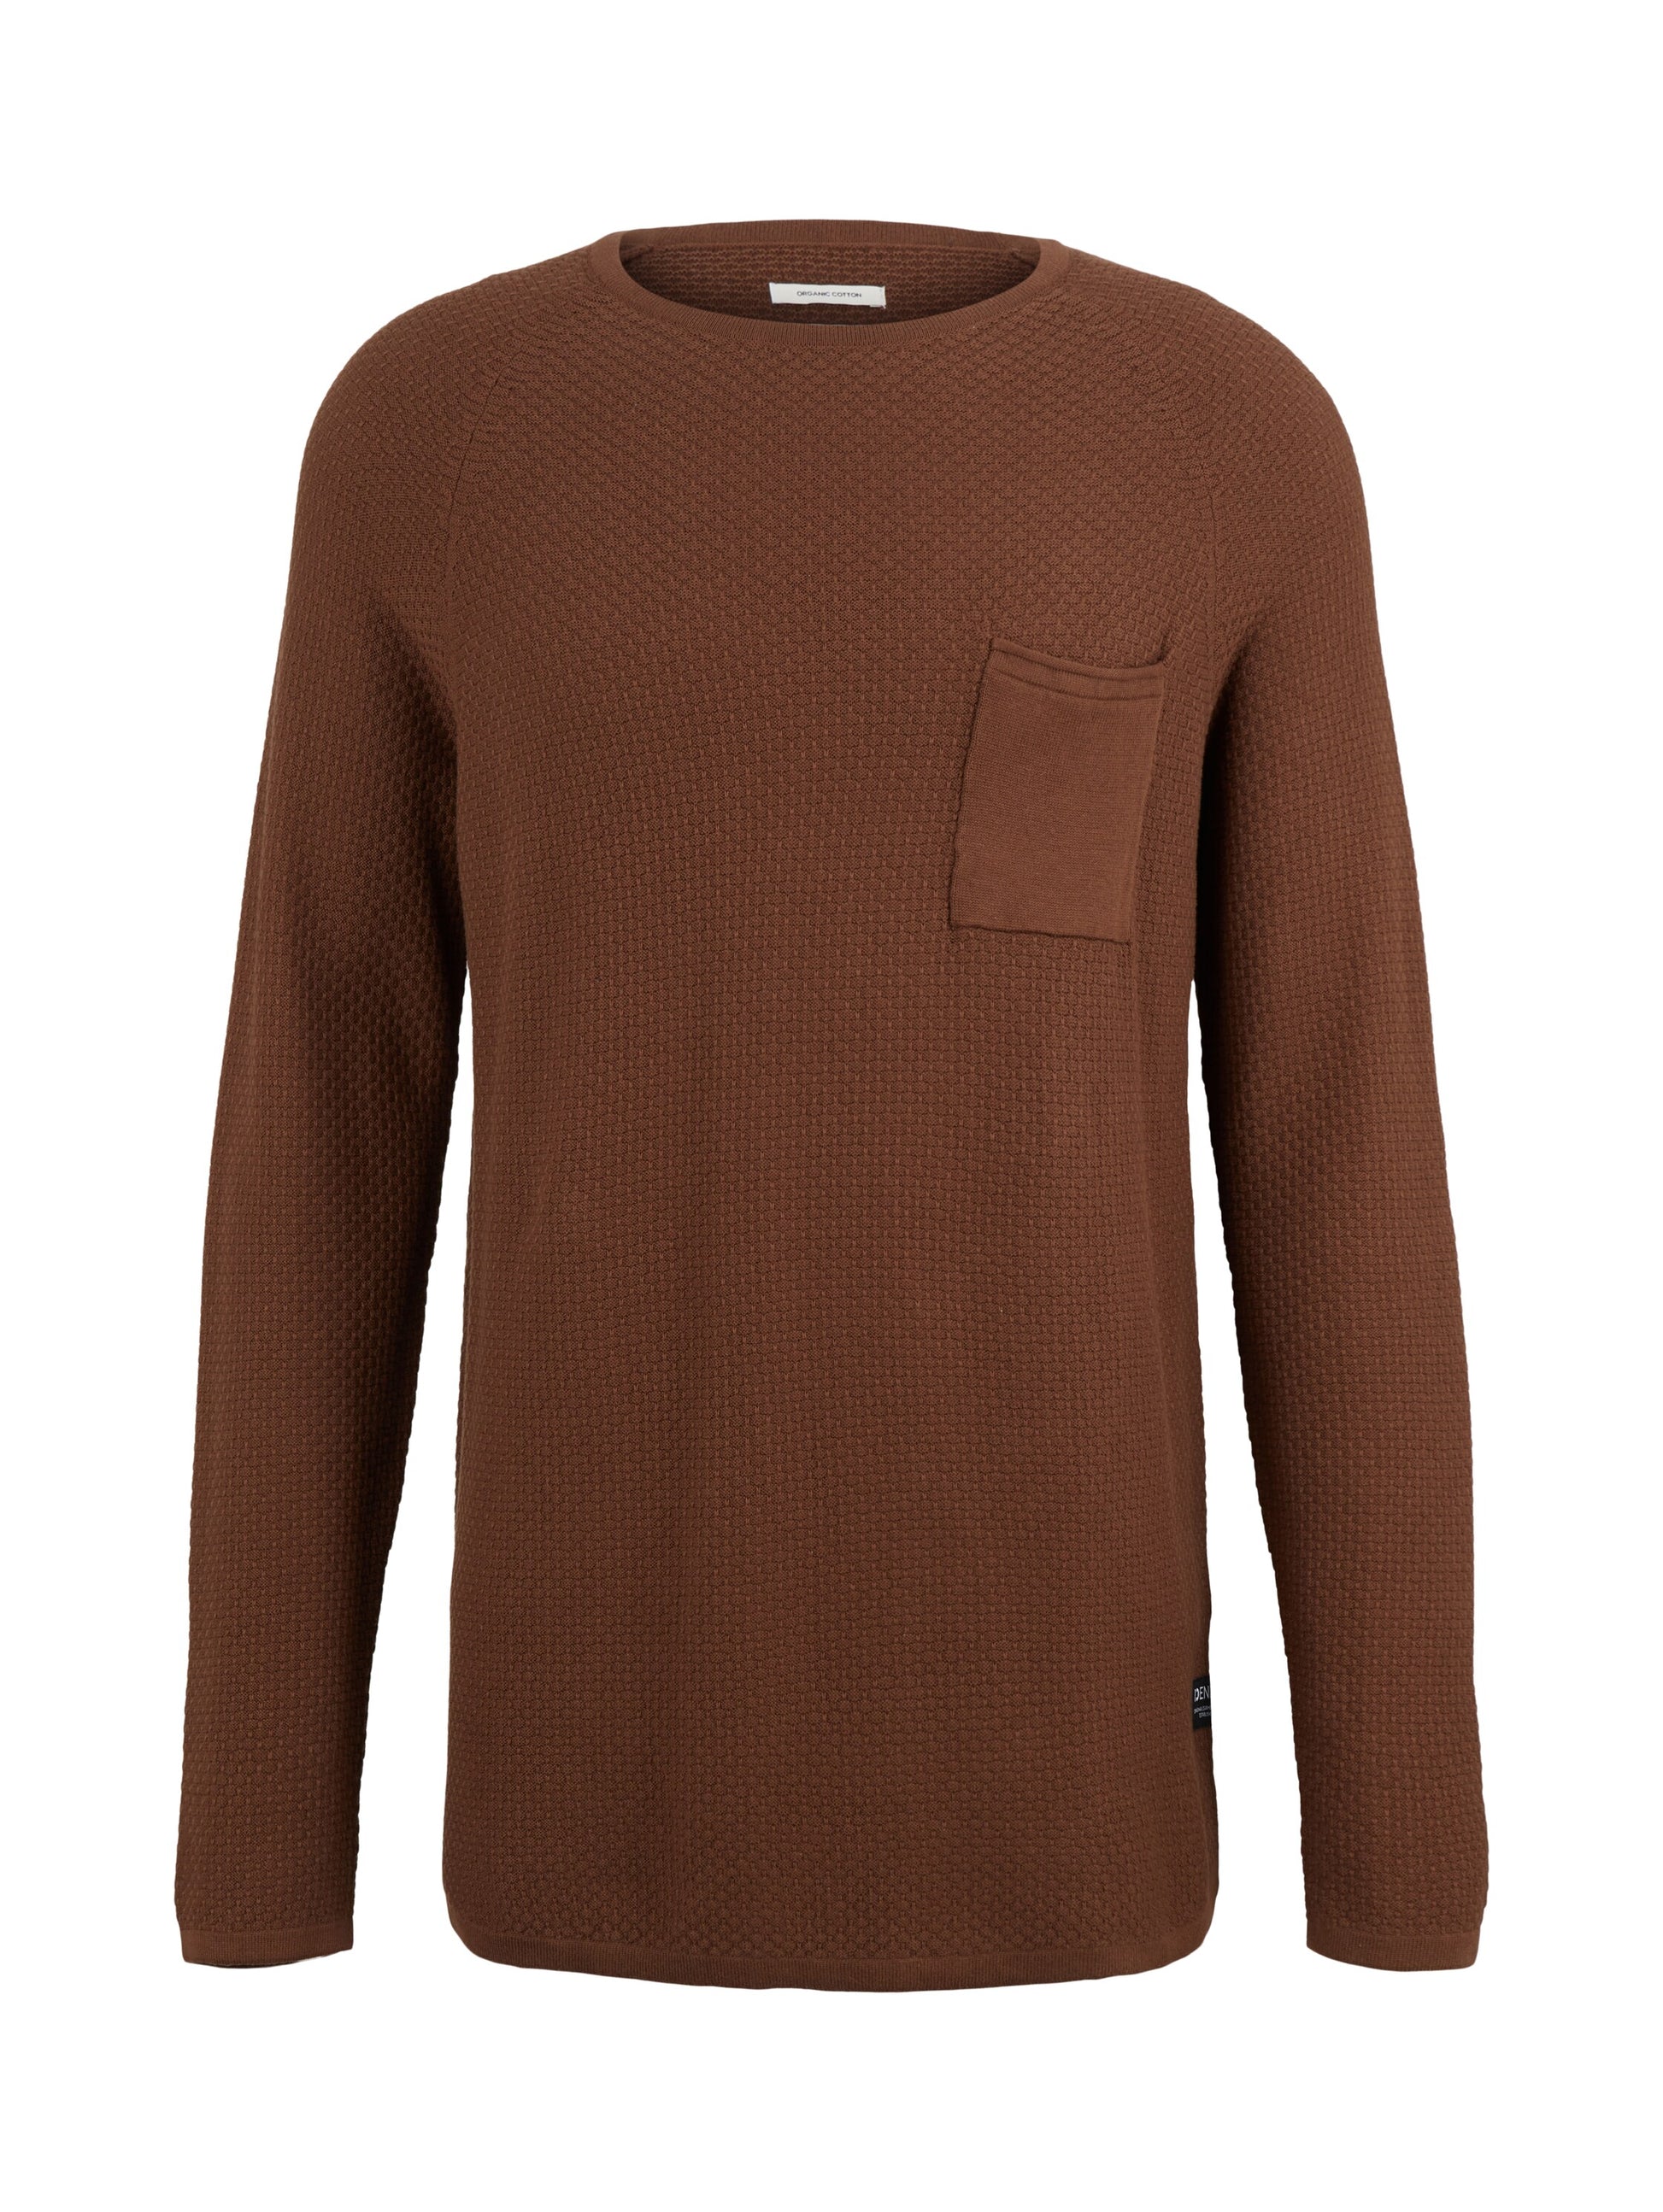 structured knit pullover (Light Wood Bro)